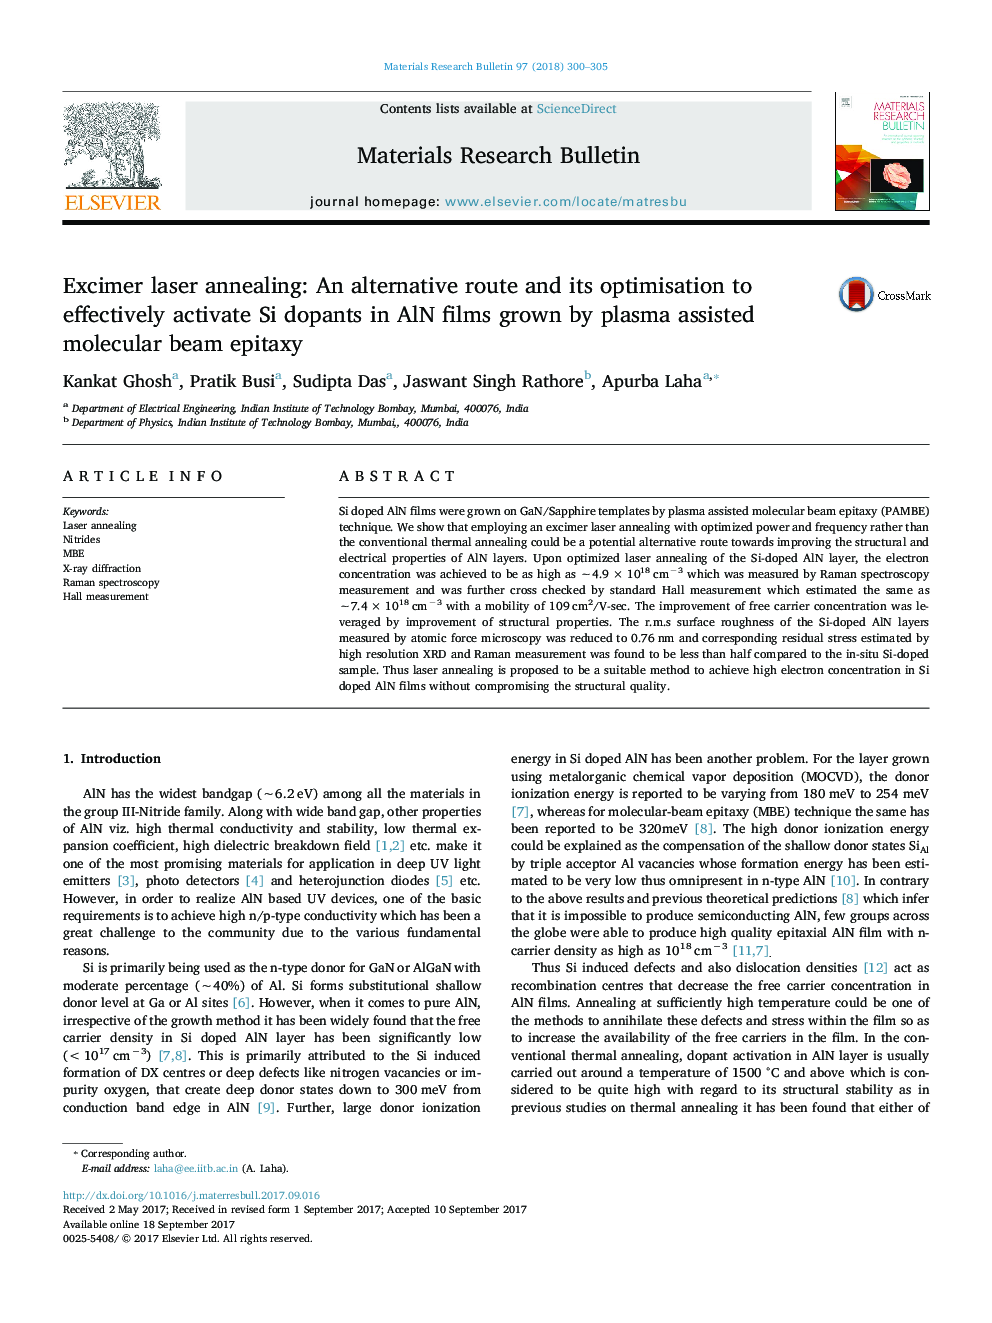 Excimer laser annealing: An alternative route and its optimisation to effectively activate Si dopants in AlN films grown by plasma assisted molecular beam epitaxy